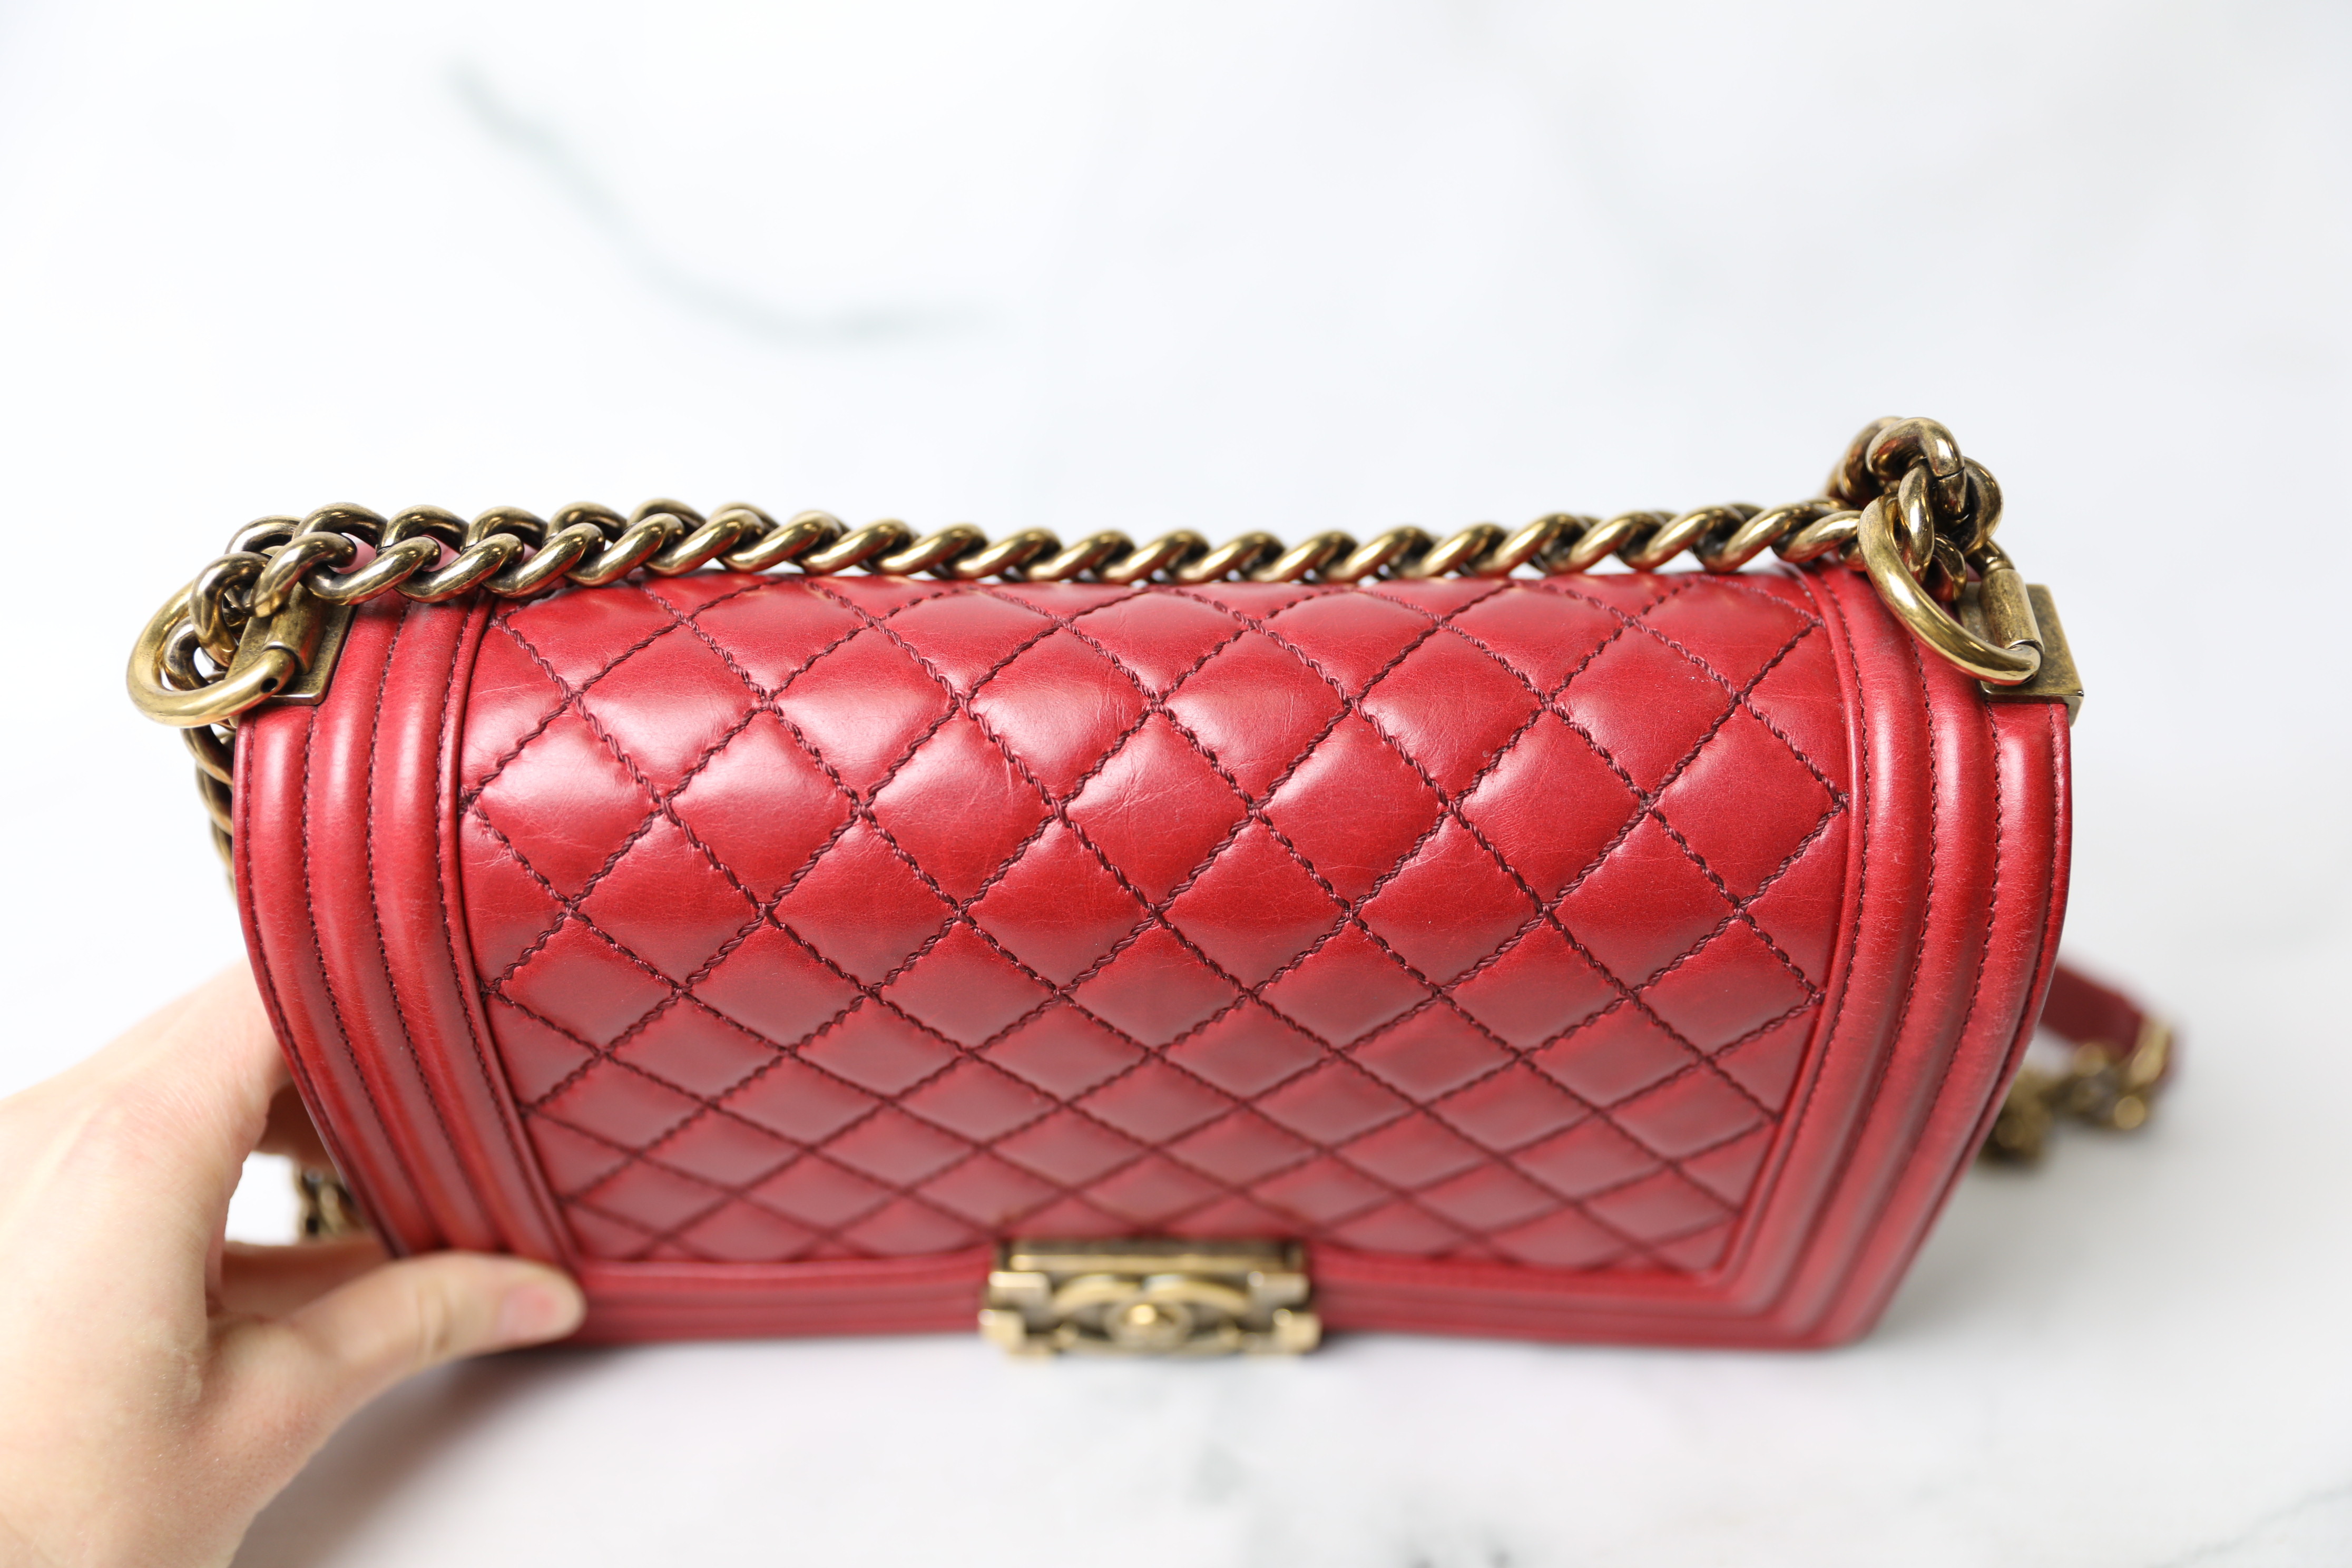 Chanel Boy Old Medium, Red Calfskin with Aged Gold Hardware, Preowned in Box  WA001 - Julia Rose Boston